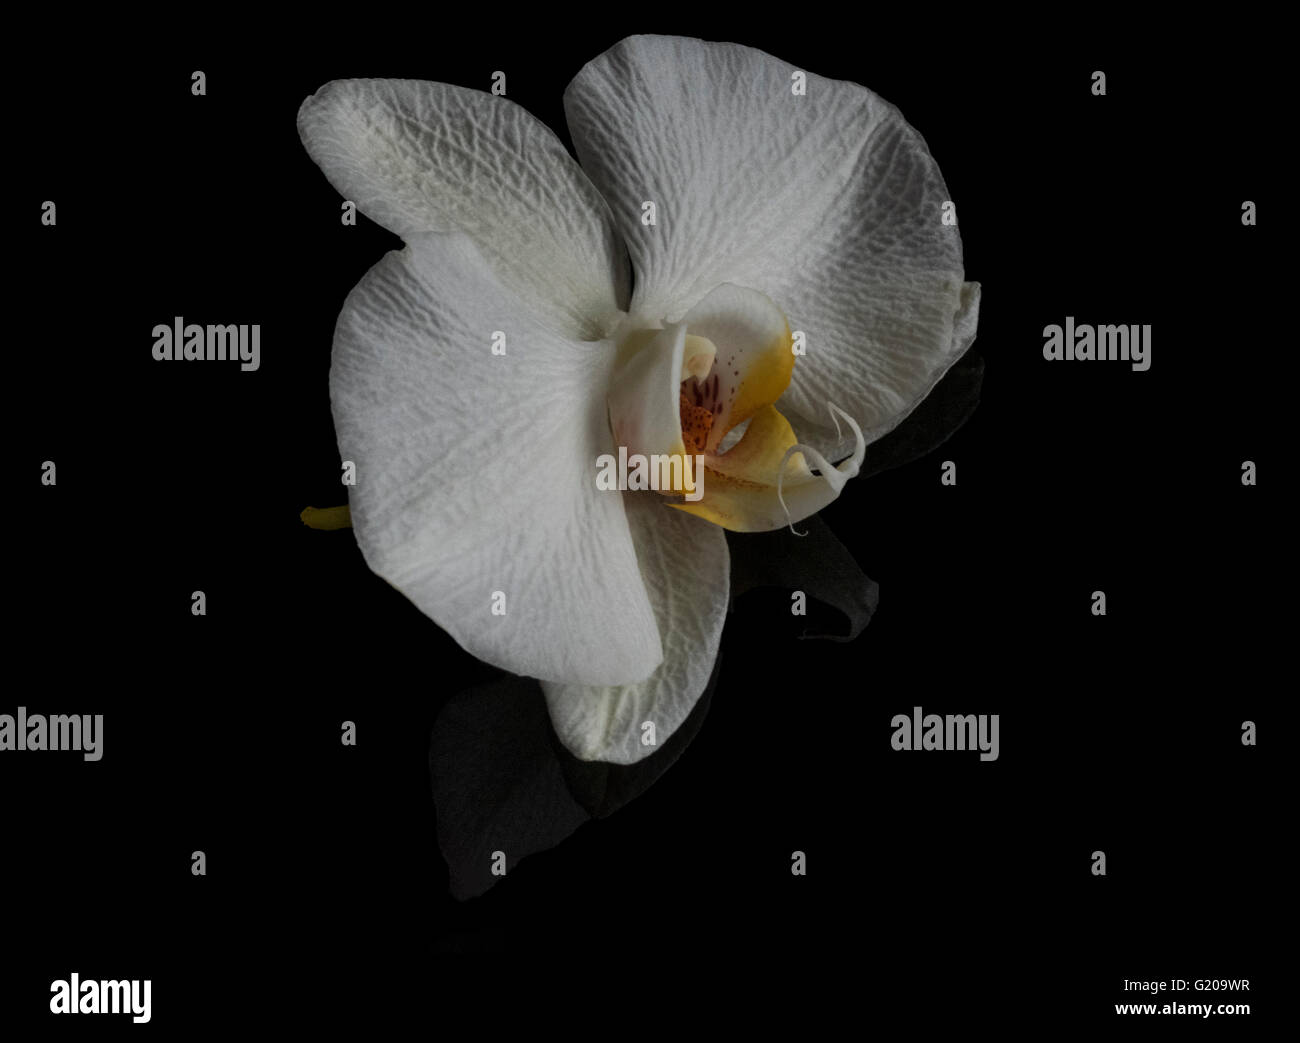 Single orchid flower isolated on shiny black surface with slight reflection Stock Photo